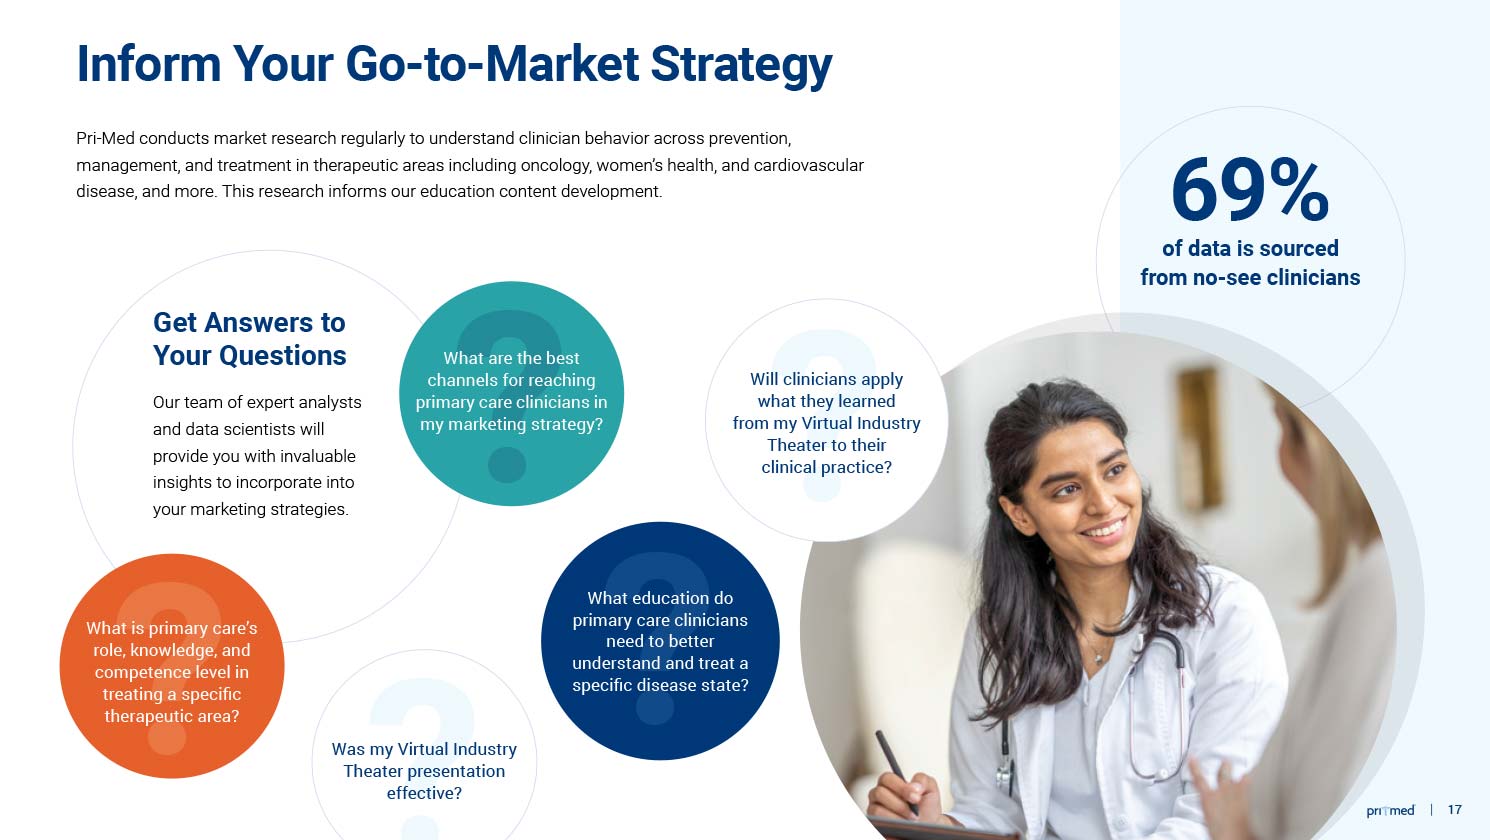 Sample Pri-Med Powerpoint presentation design with title "Inform Your Go-to-Market Strategy"